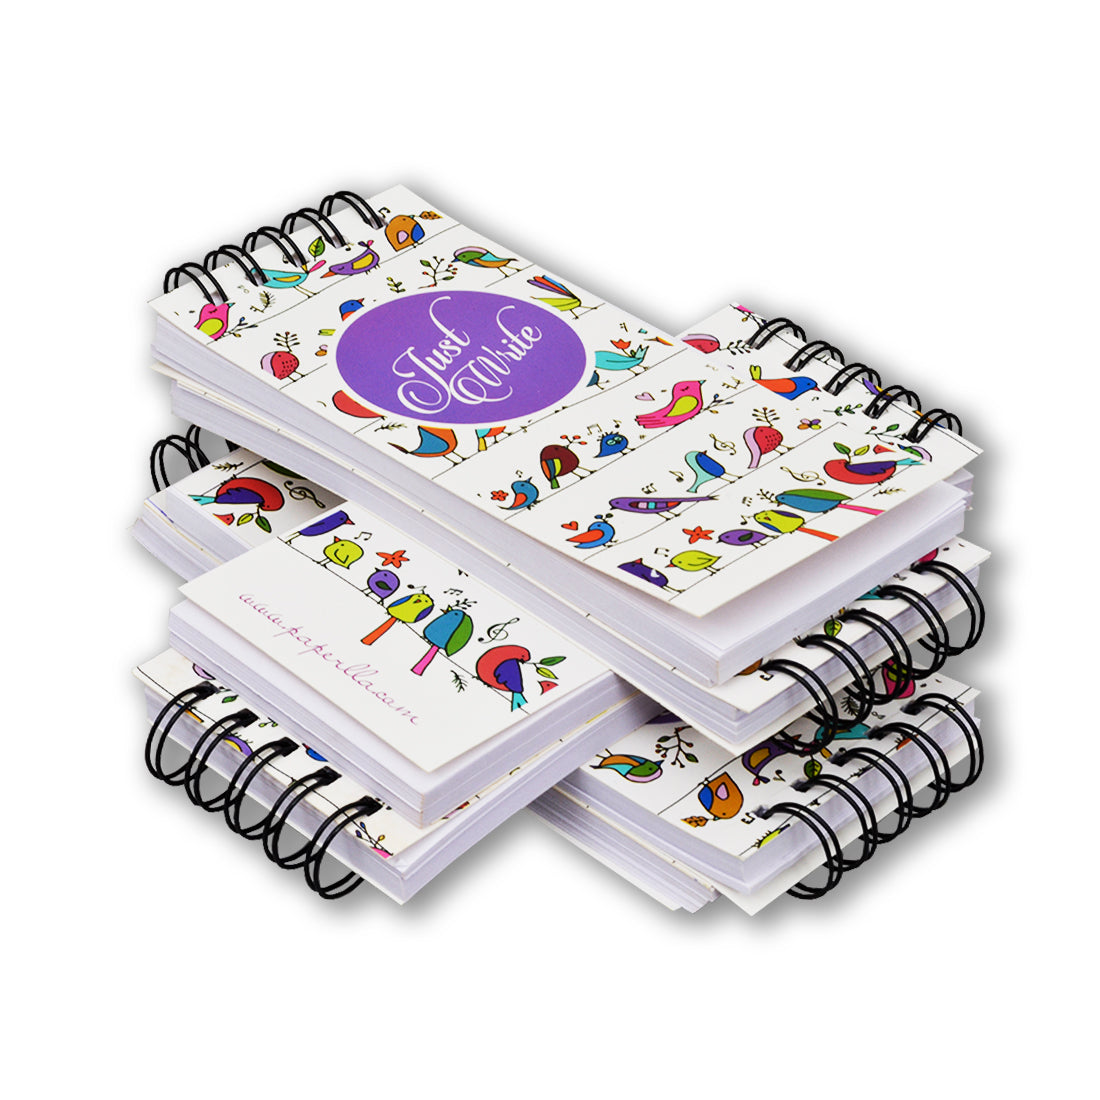 Daily Undated Notepad with Spiral Binding Plain Paged (Set of 6) Tear off Sheets Memo Notebook.